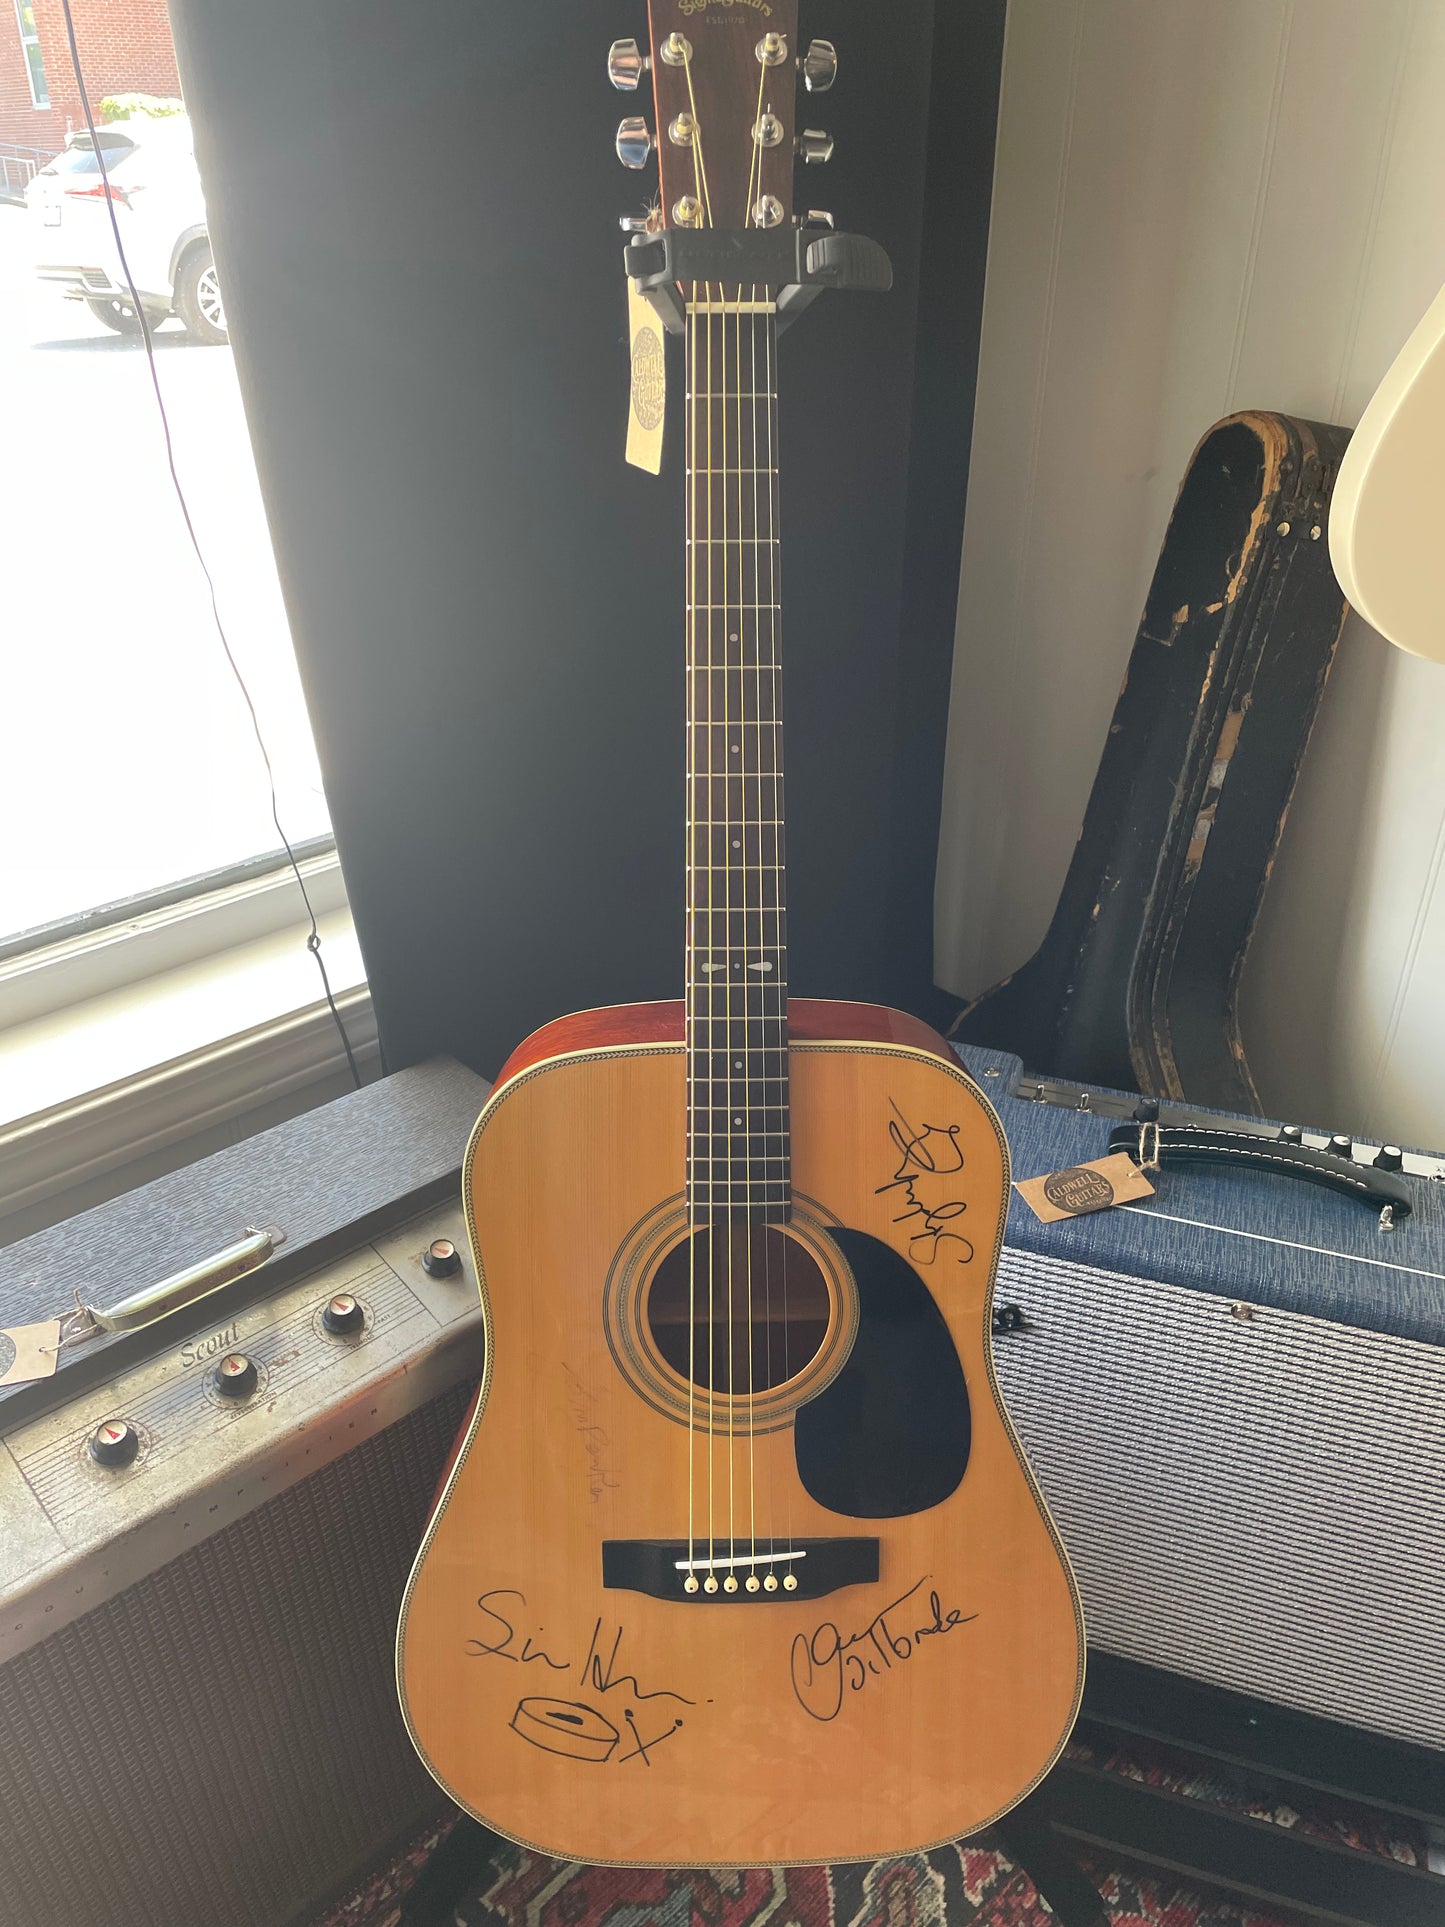 Martin Sigma DM4H - Signed By Squeeze